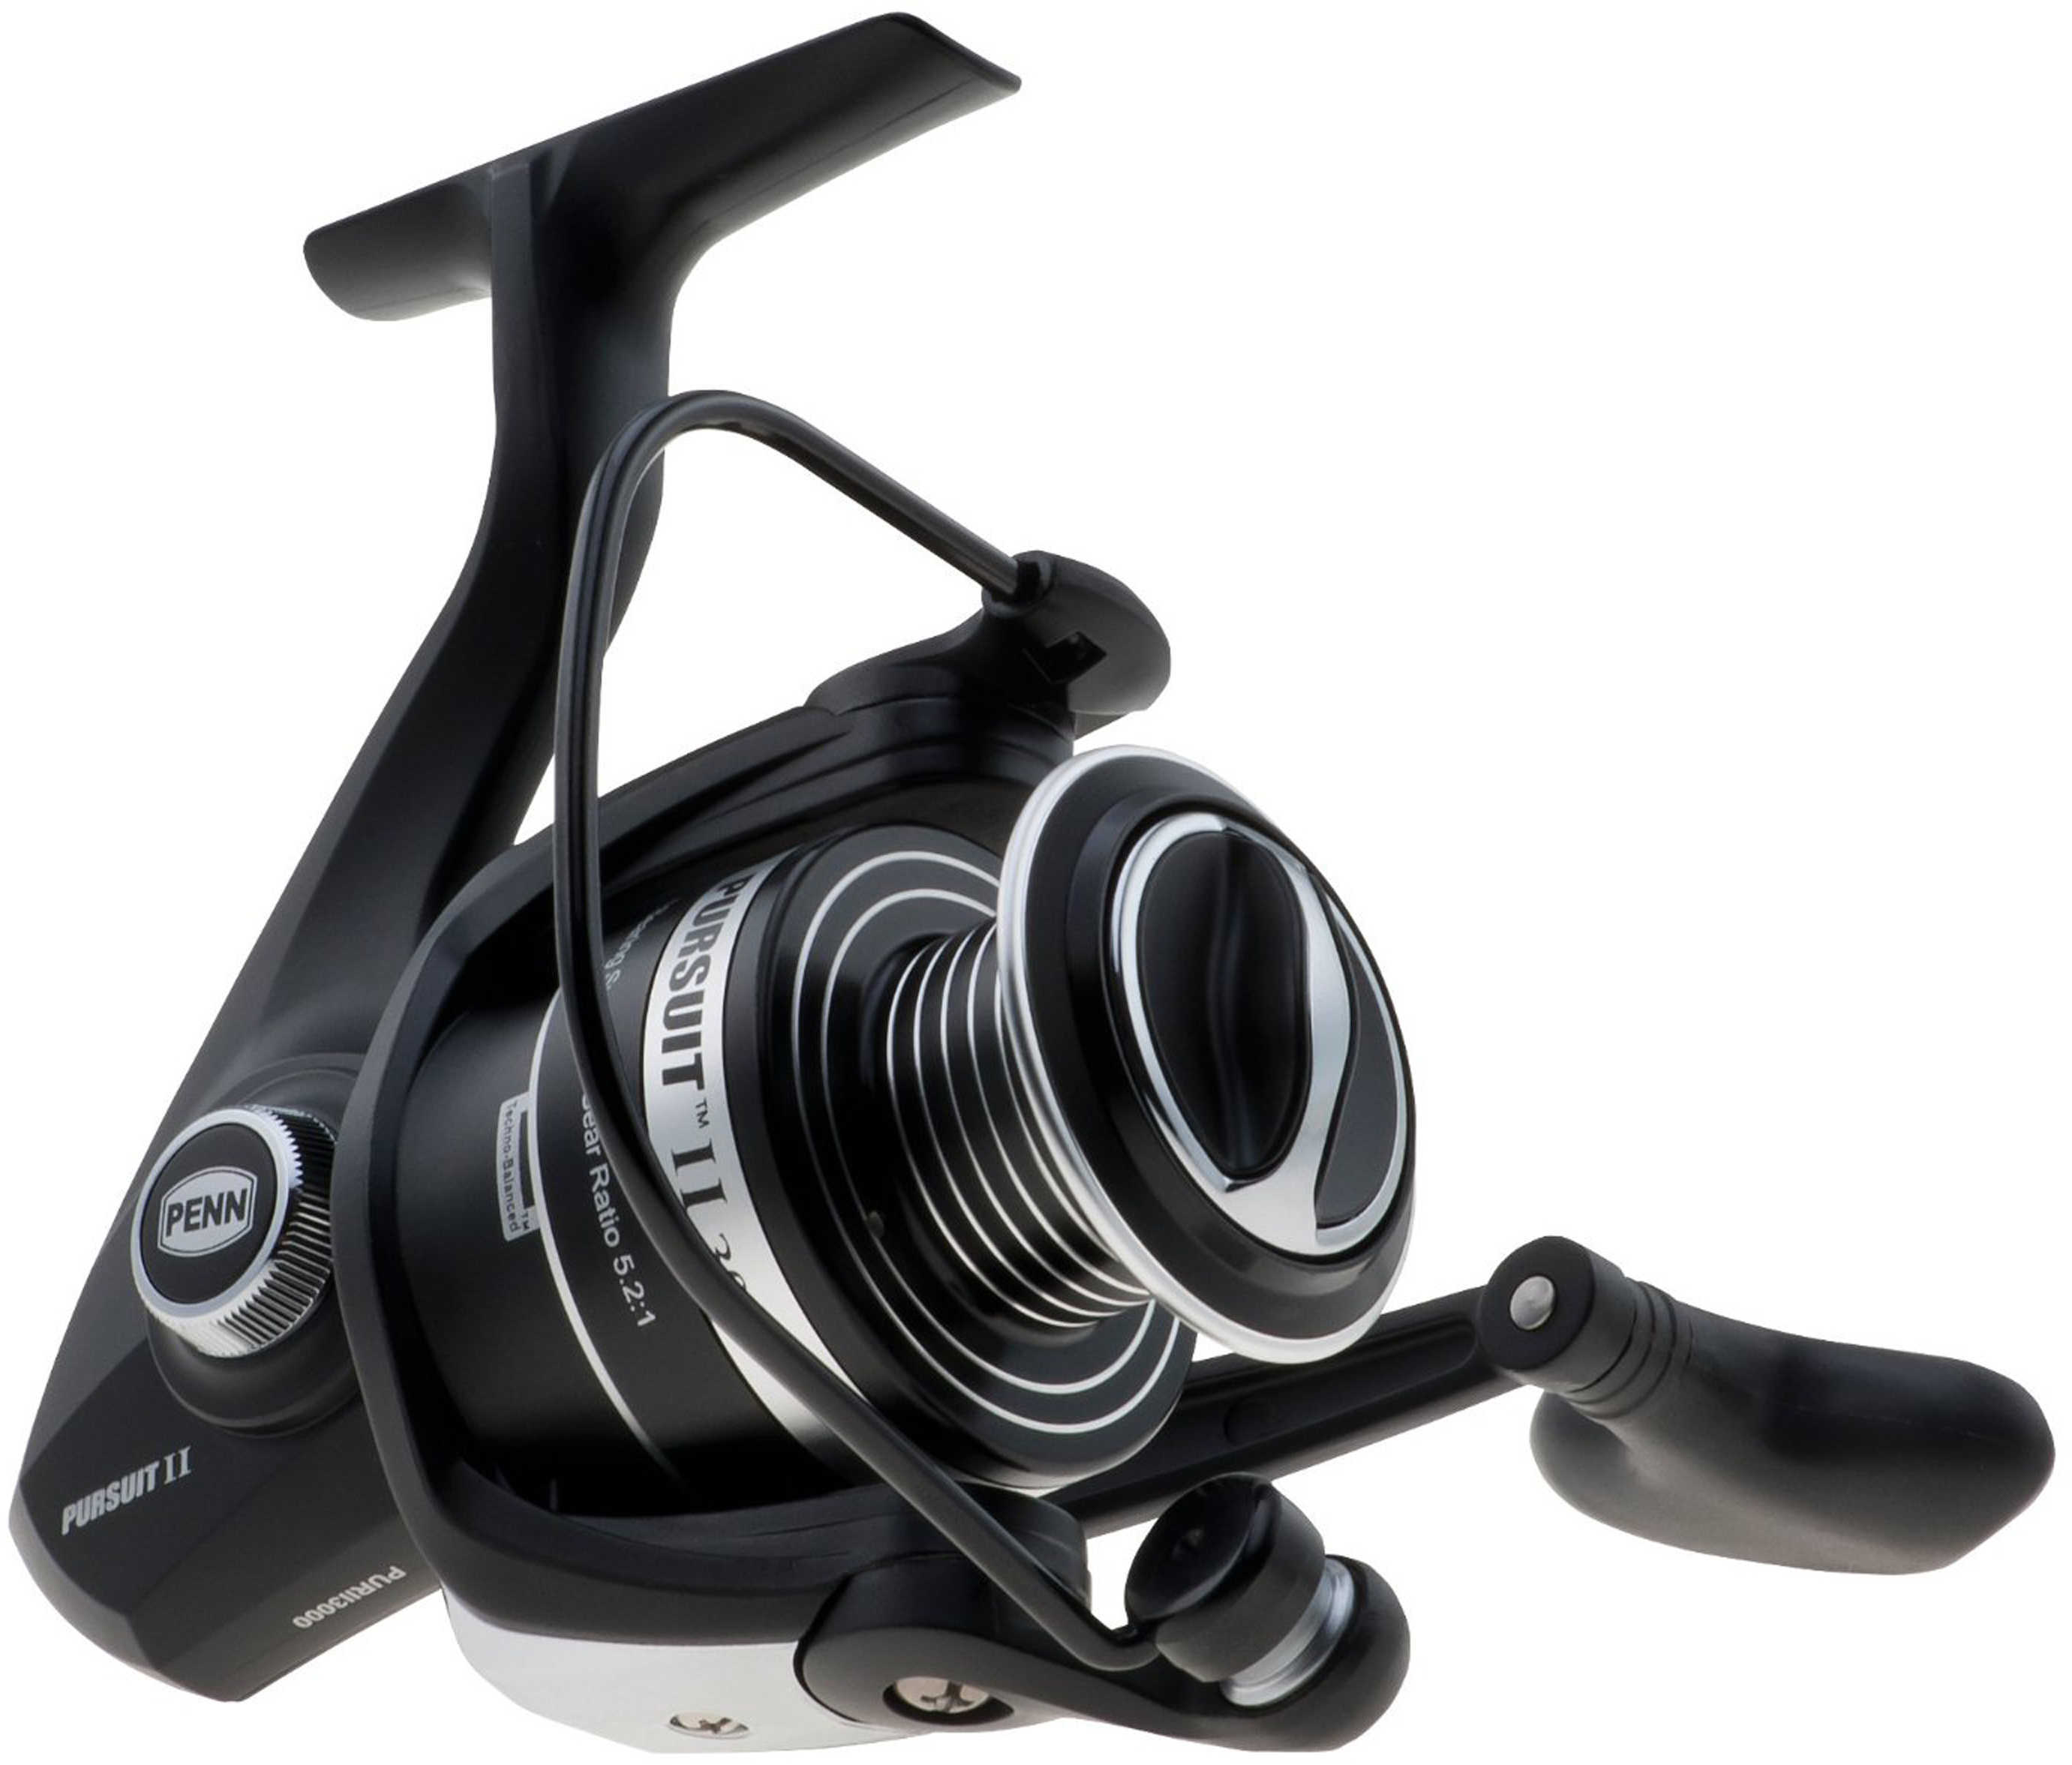 Penn Pursuit II Spin Reel 4000, Boxed 1292958